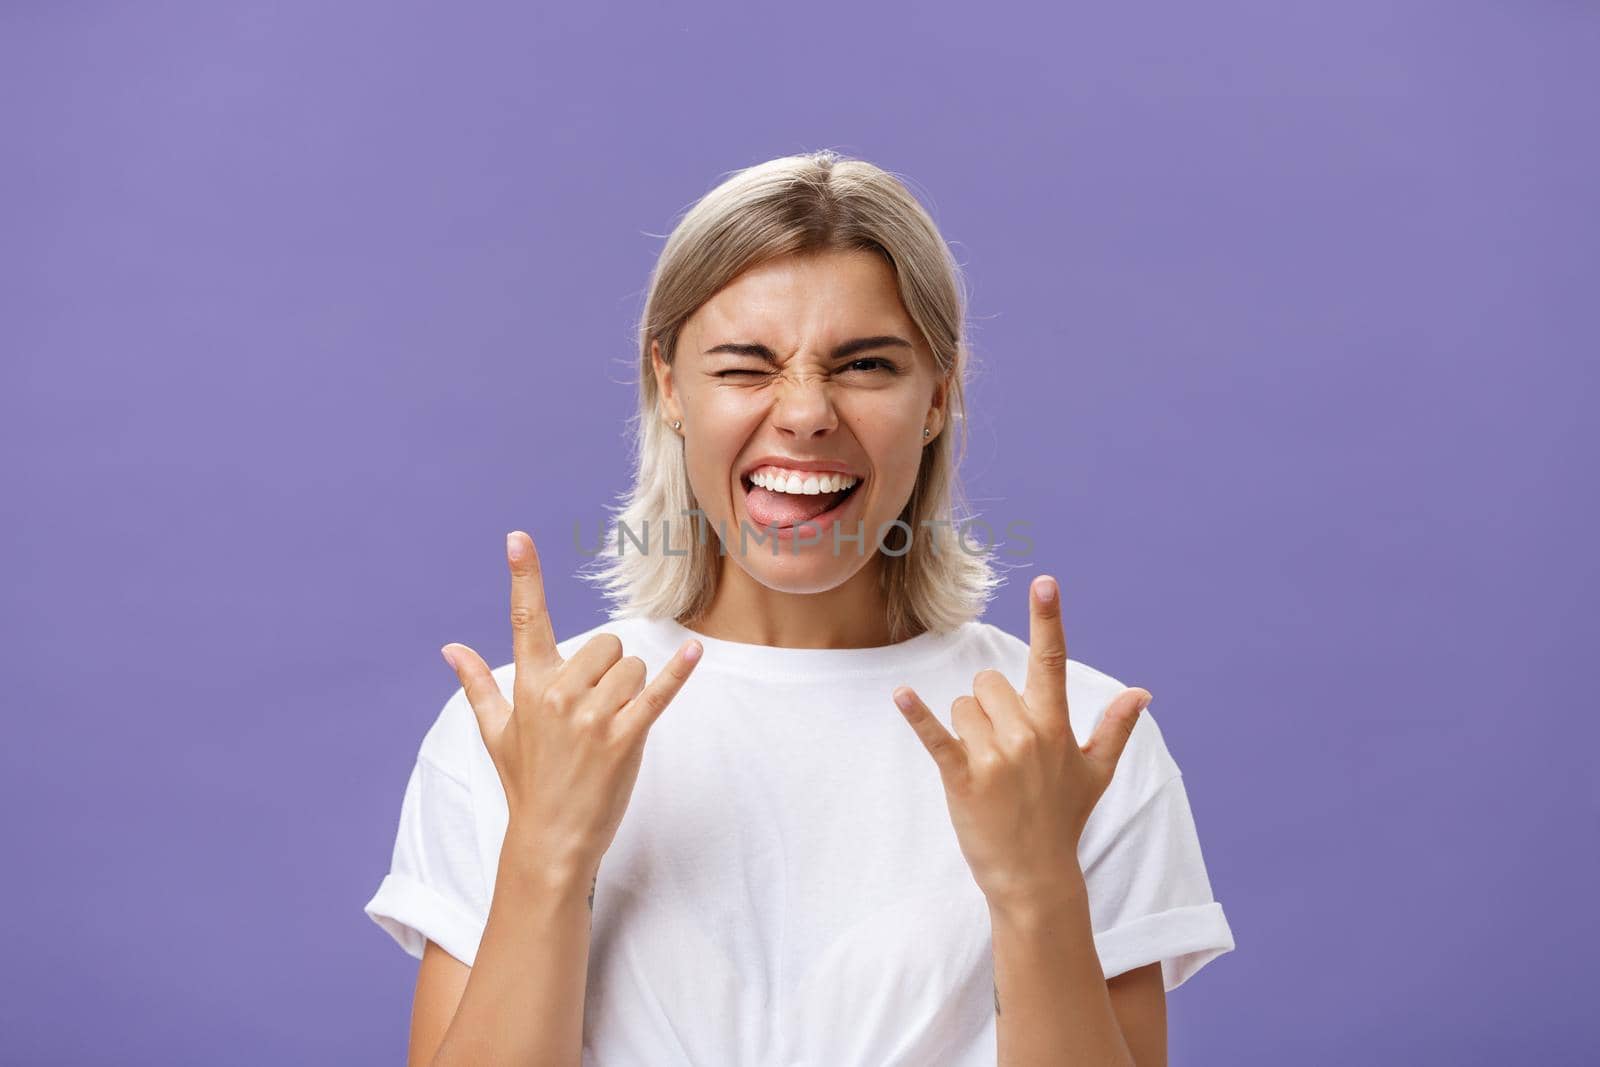 Gonna rock. Portrait of joyful happy good-looking stylish woman with blond medium haircut winking smiling and sticking out tongue while showing rock-n-roll gesture with both hands over purple wall.